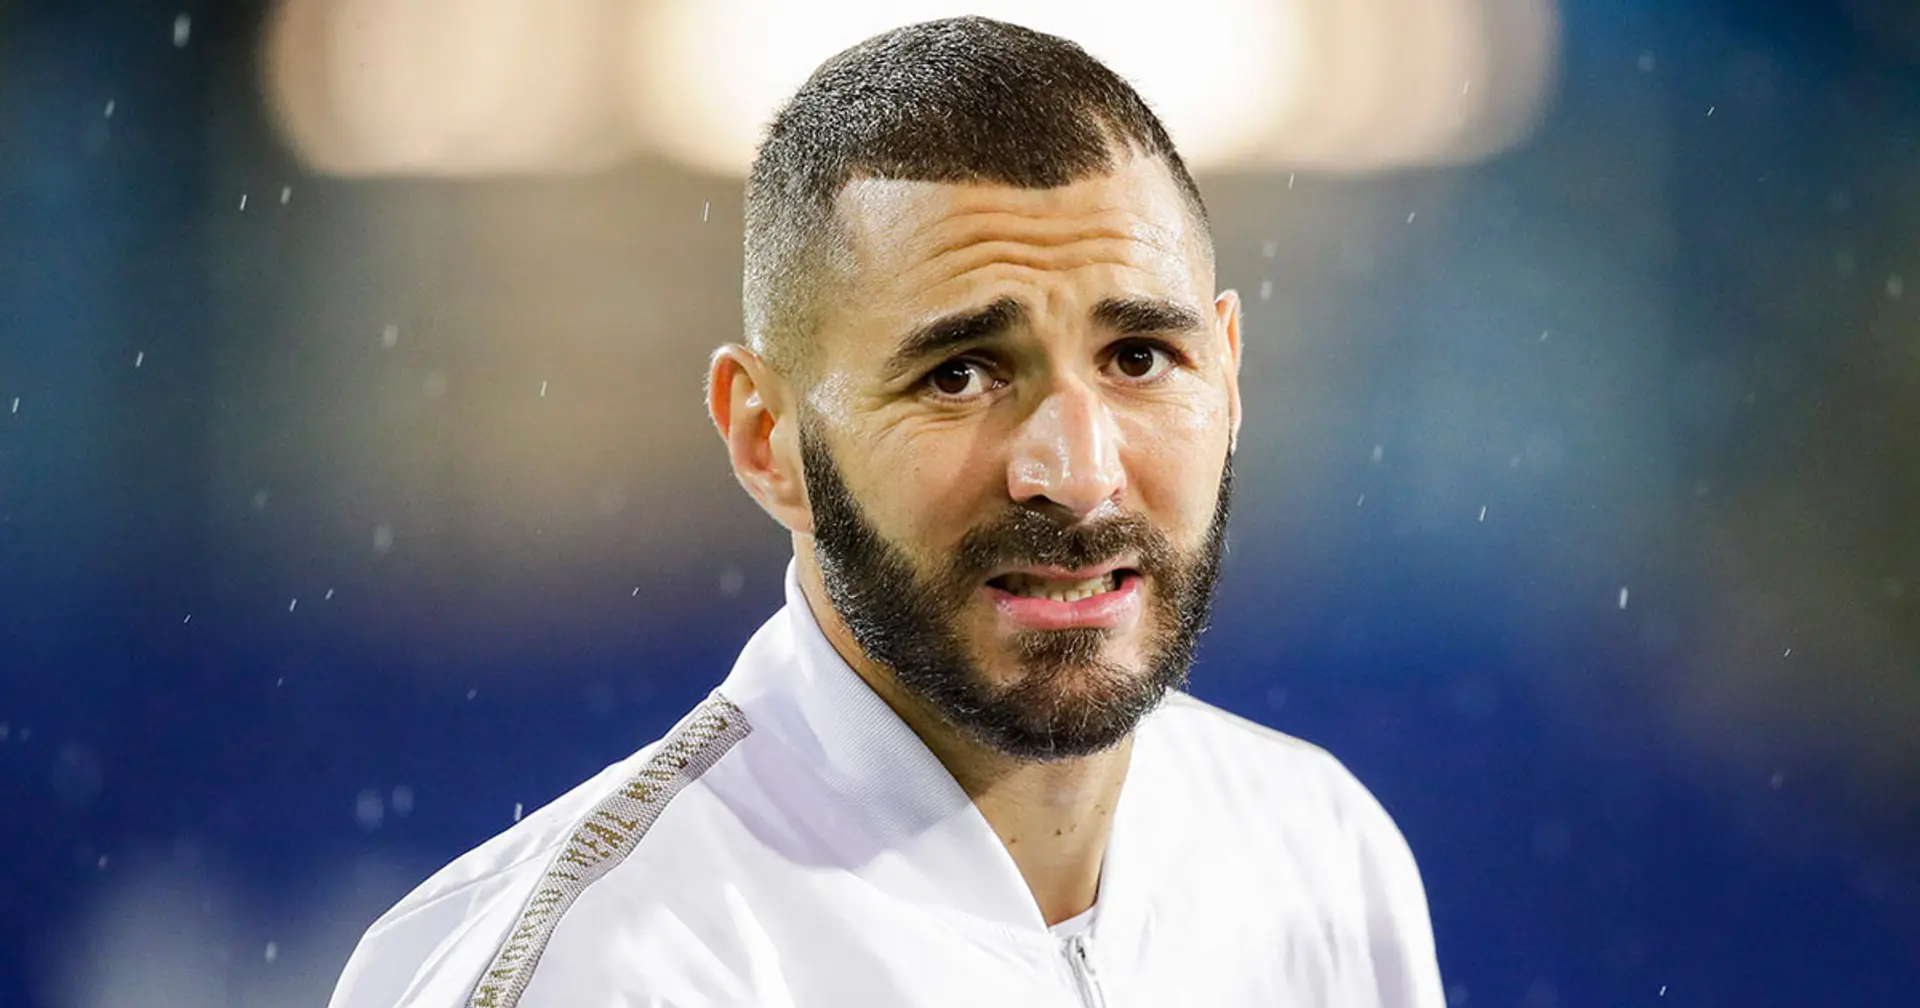 Juventus contact Real Madrid over Karim Benzema on 'precise request' from Cristiano Ronaldo